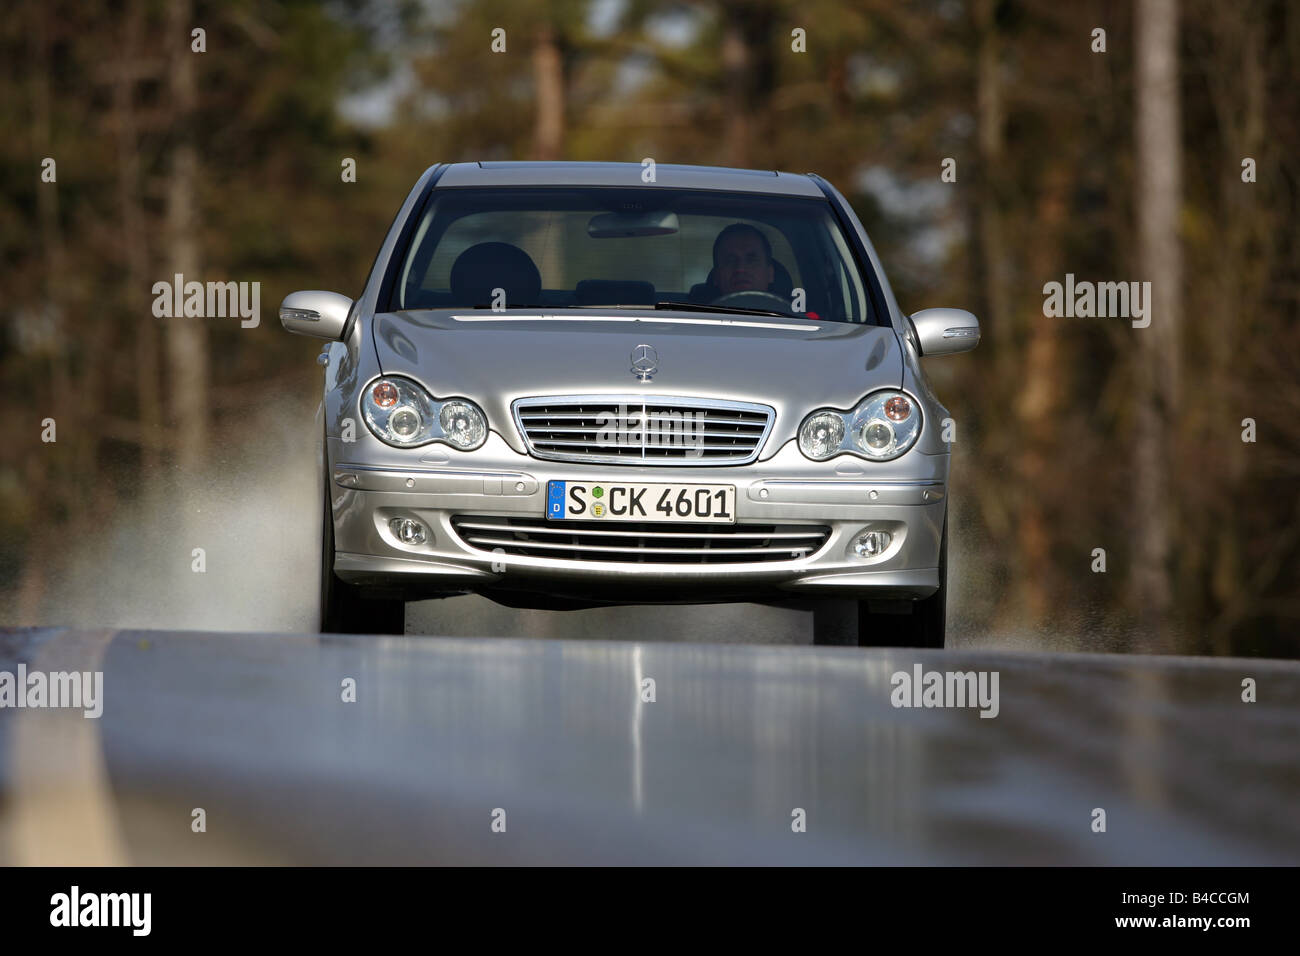 Mercedes c class road hi-res stock photography and images - Alamy